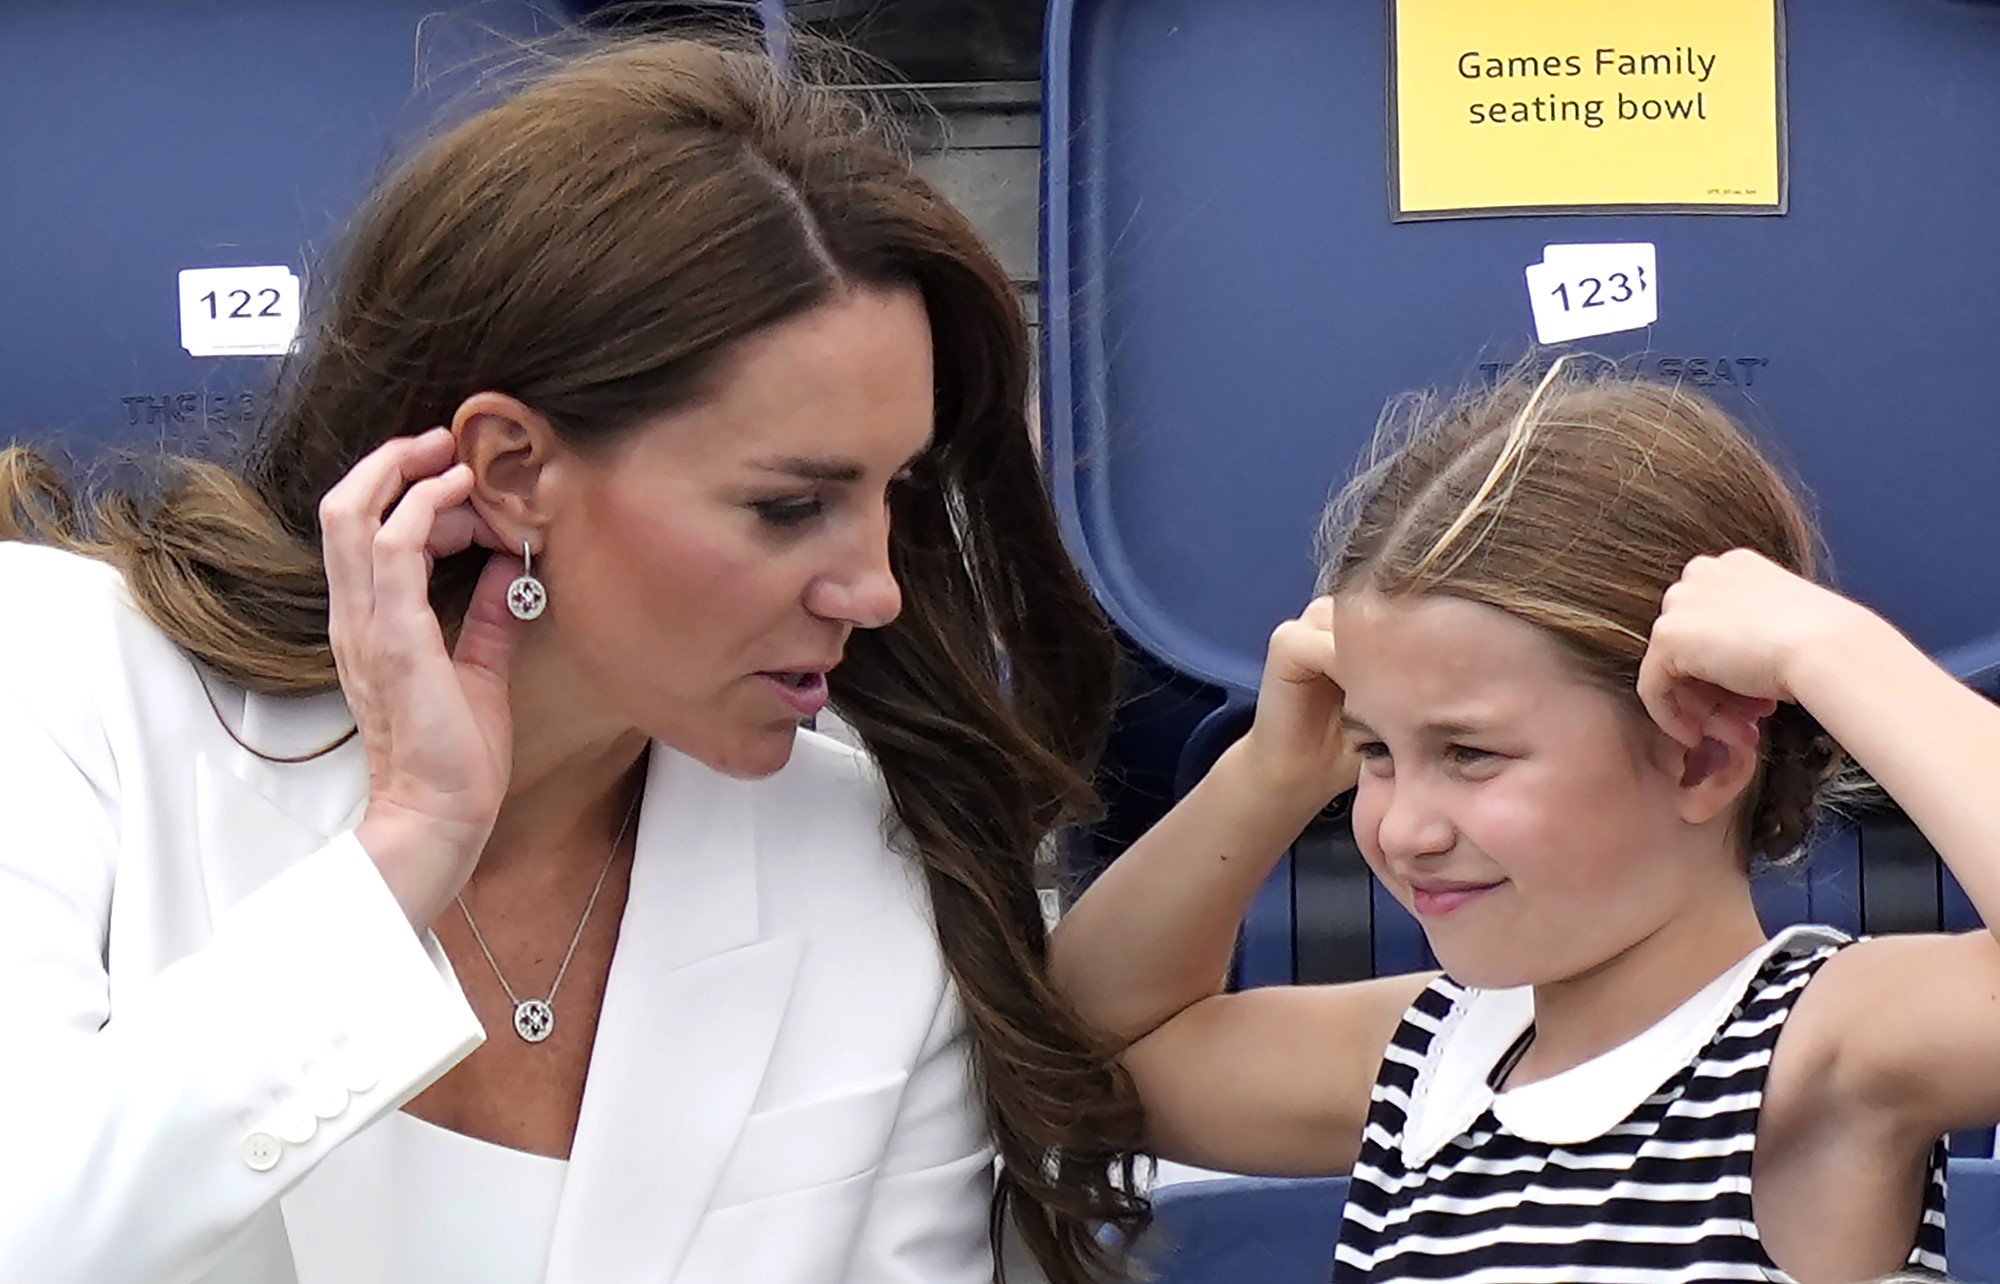 duchess kate speaks to daughter charlotte sitting in grandstand at swimming arena